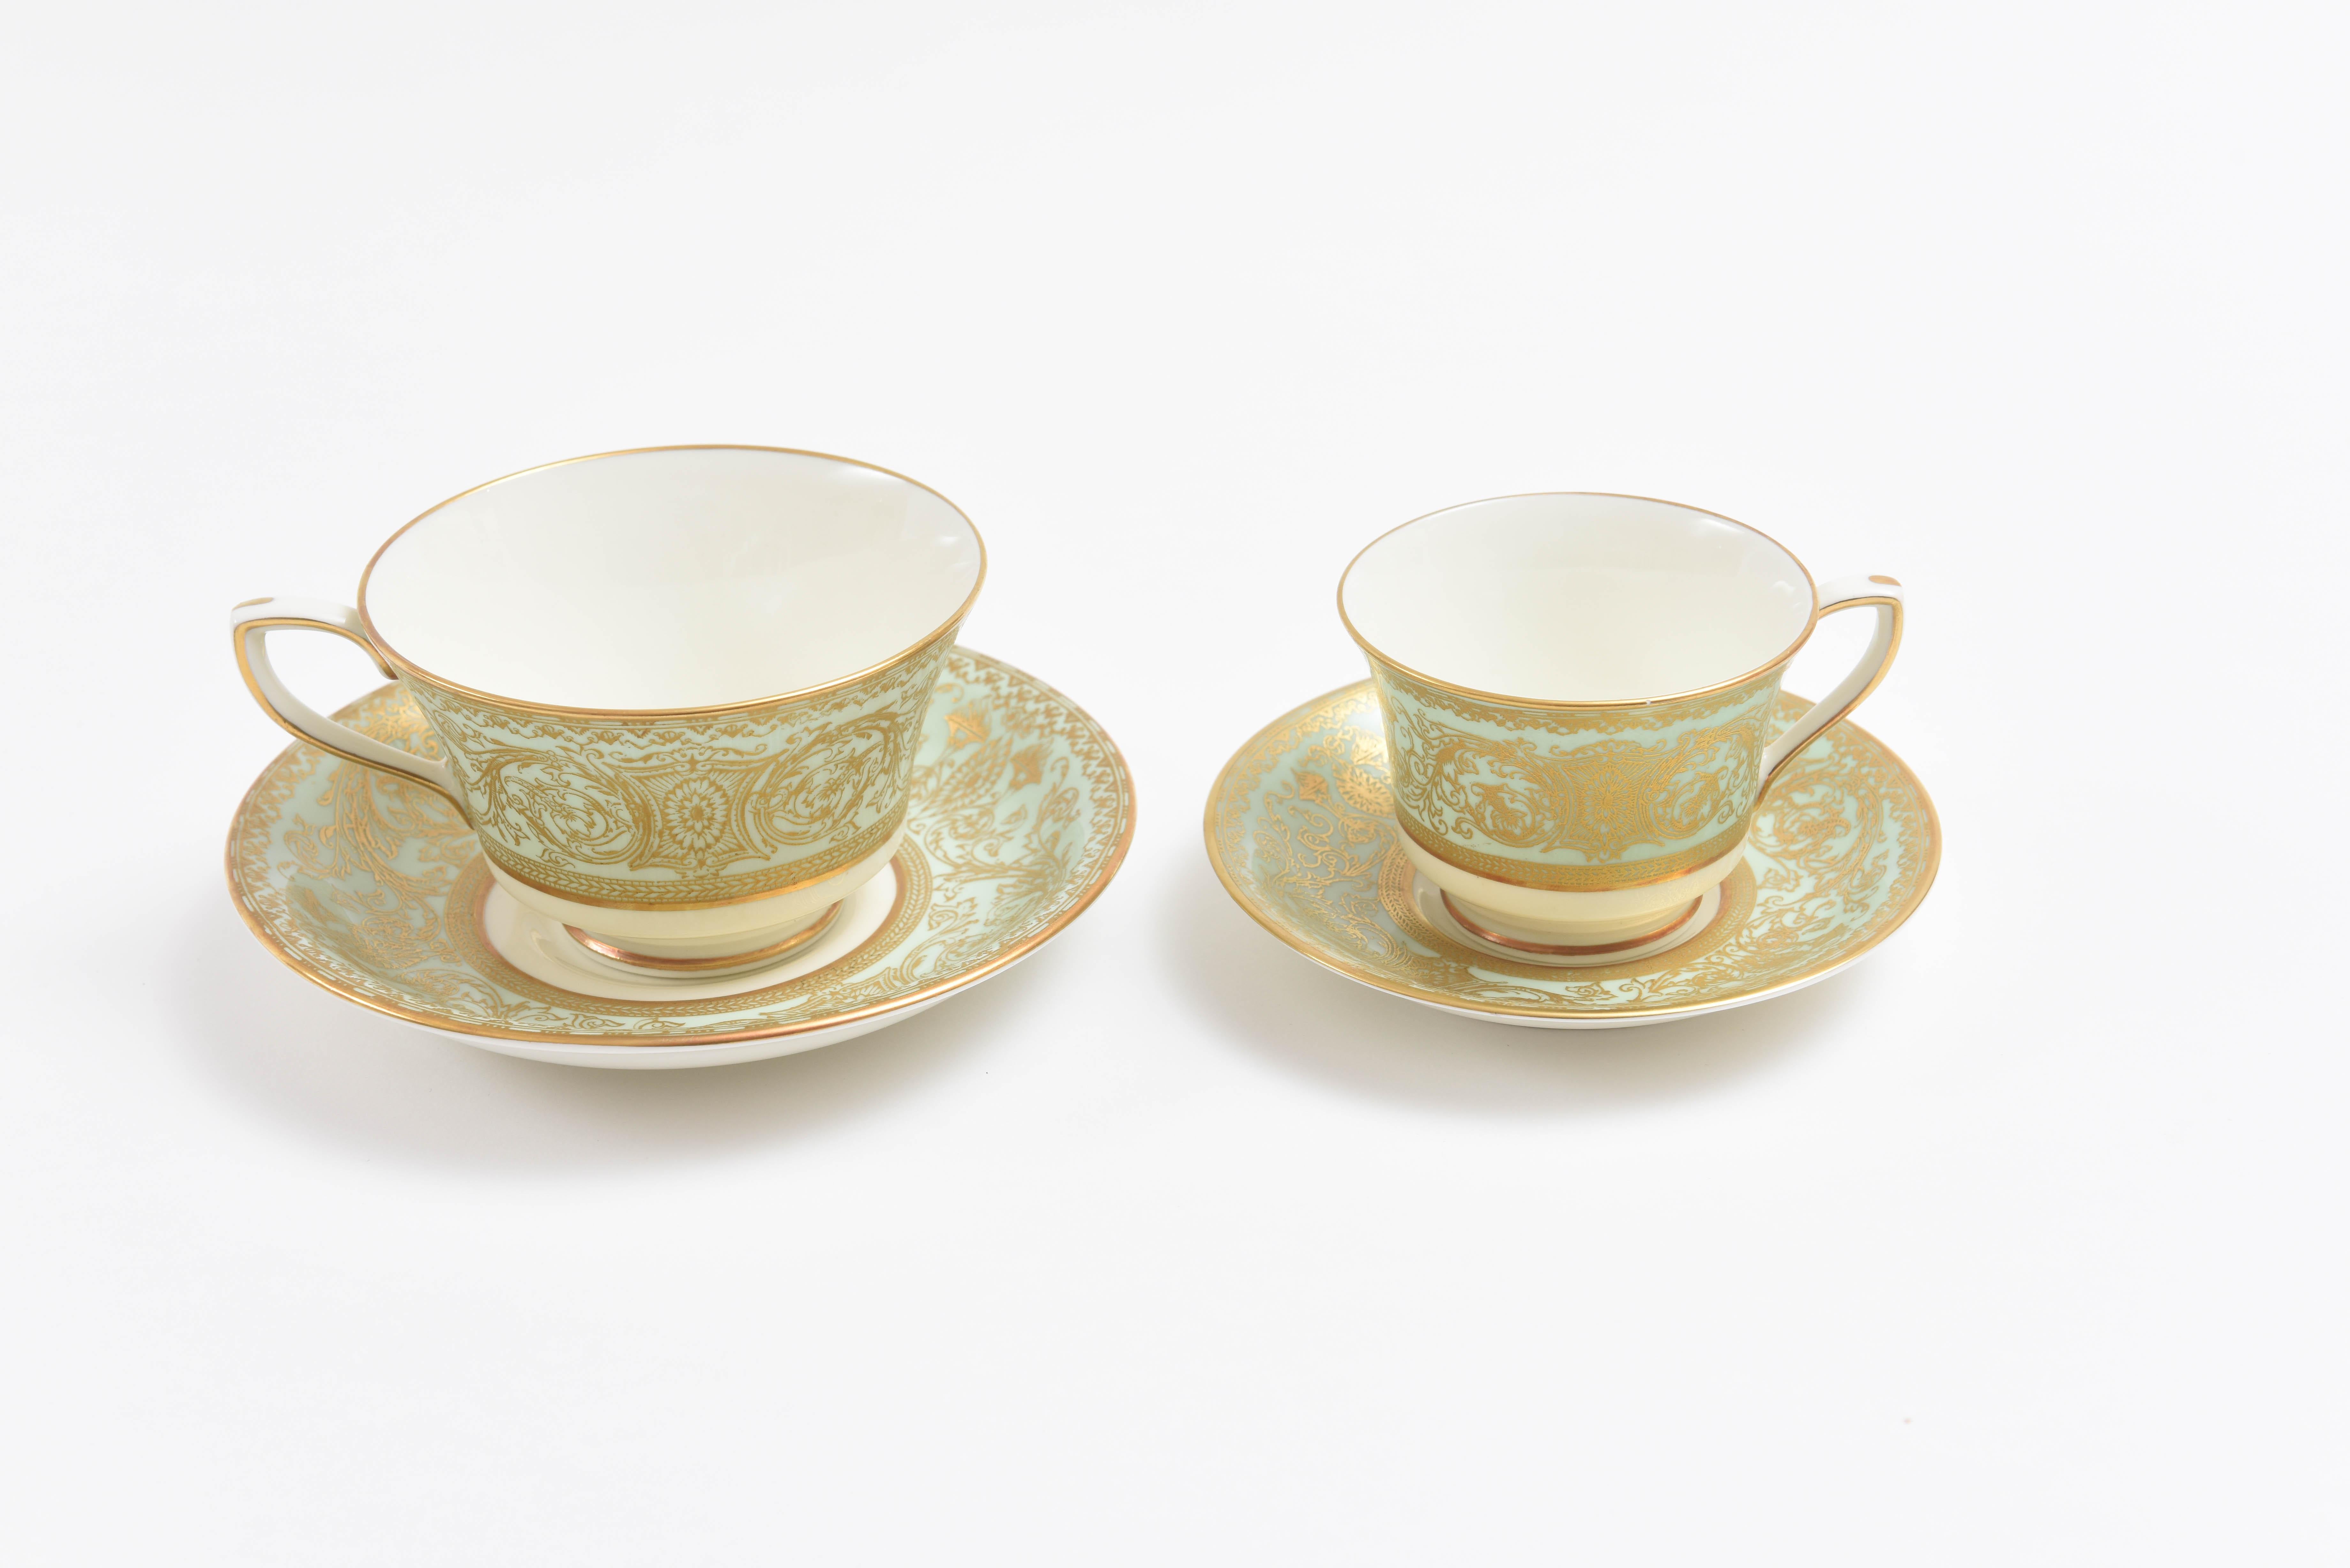 Hand-Crafted Extensive English Porcelain Service for 12, Lovely Sage Mint Green Gilded 106 Pc